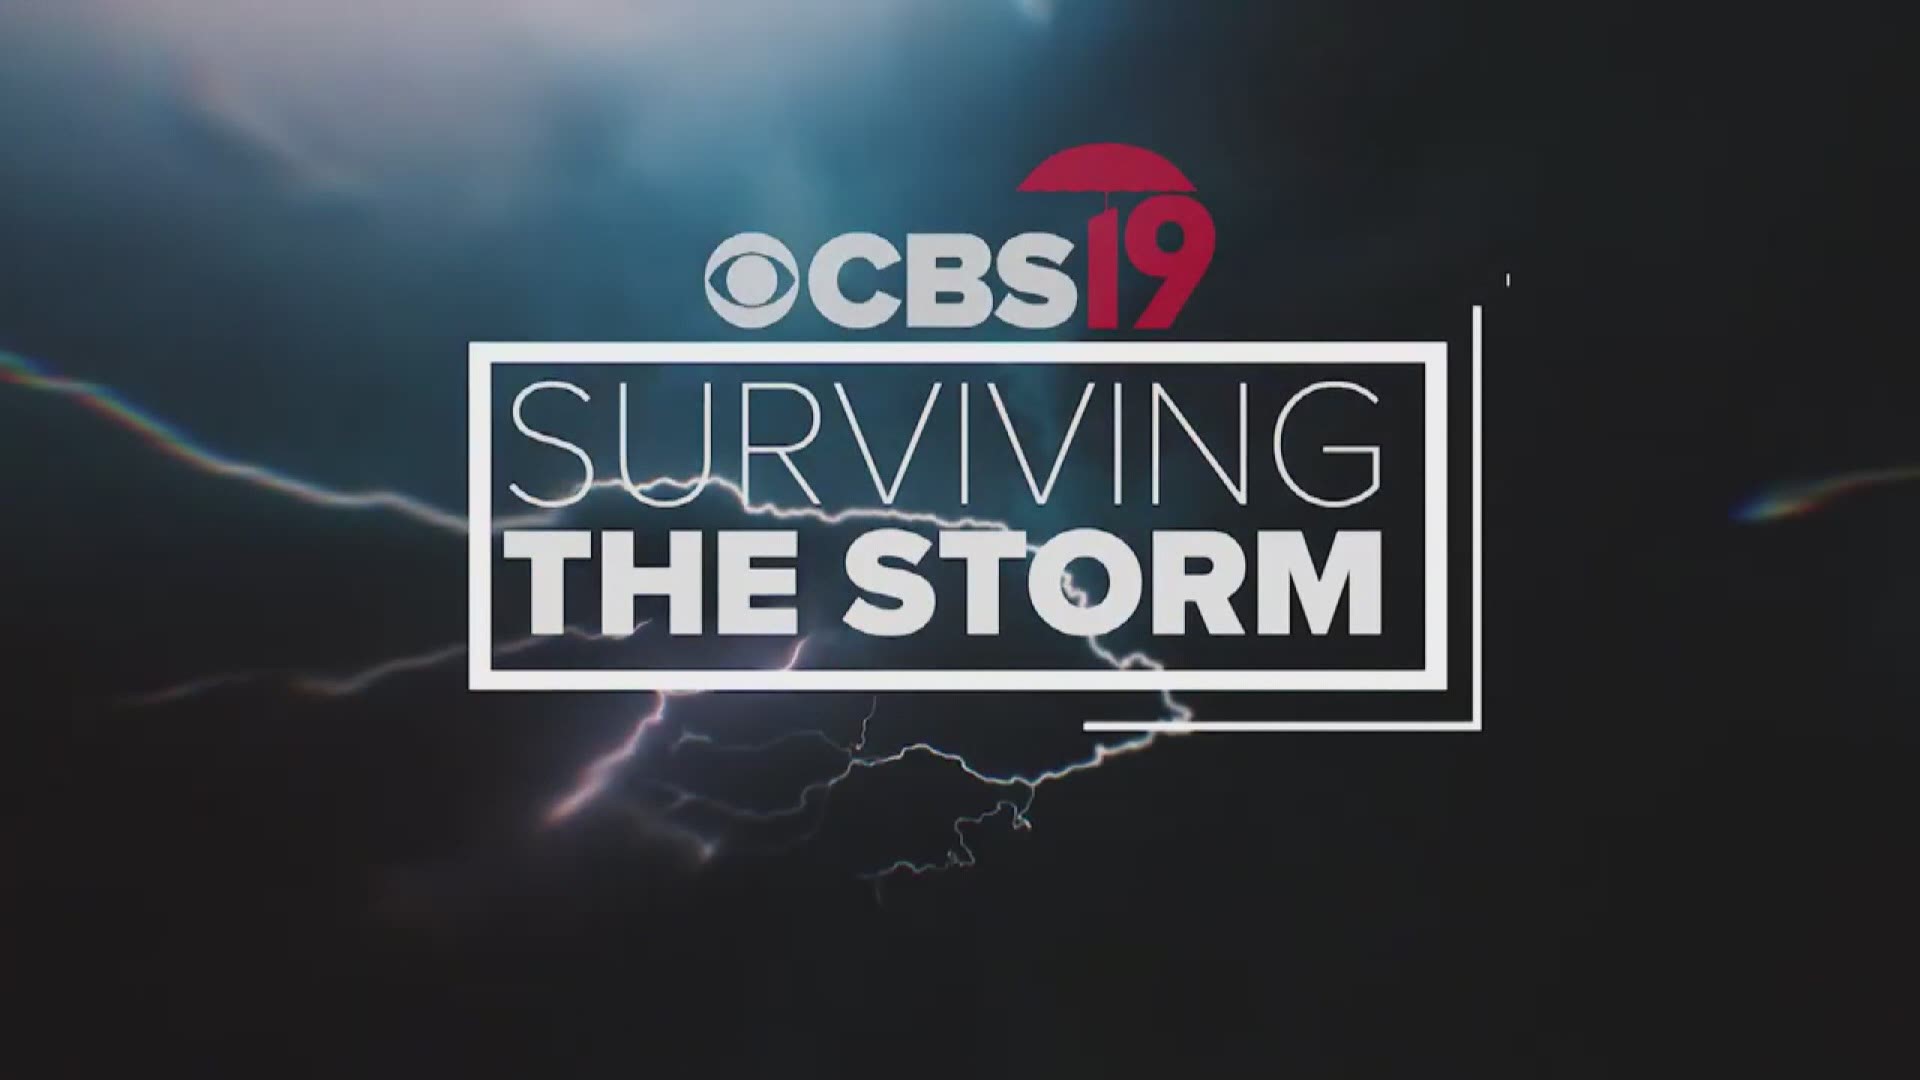 CBS19 presents Surviving the Storm to make sure you're prepared for severe weather season.